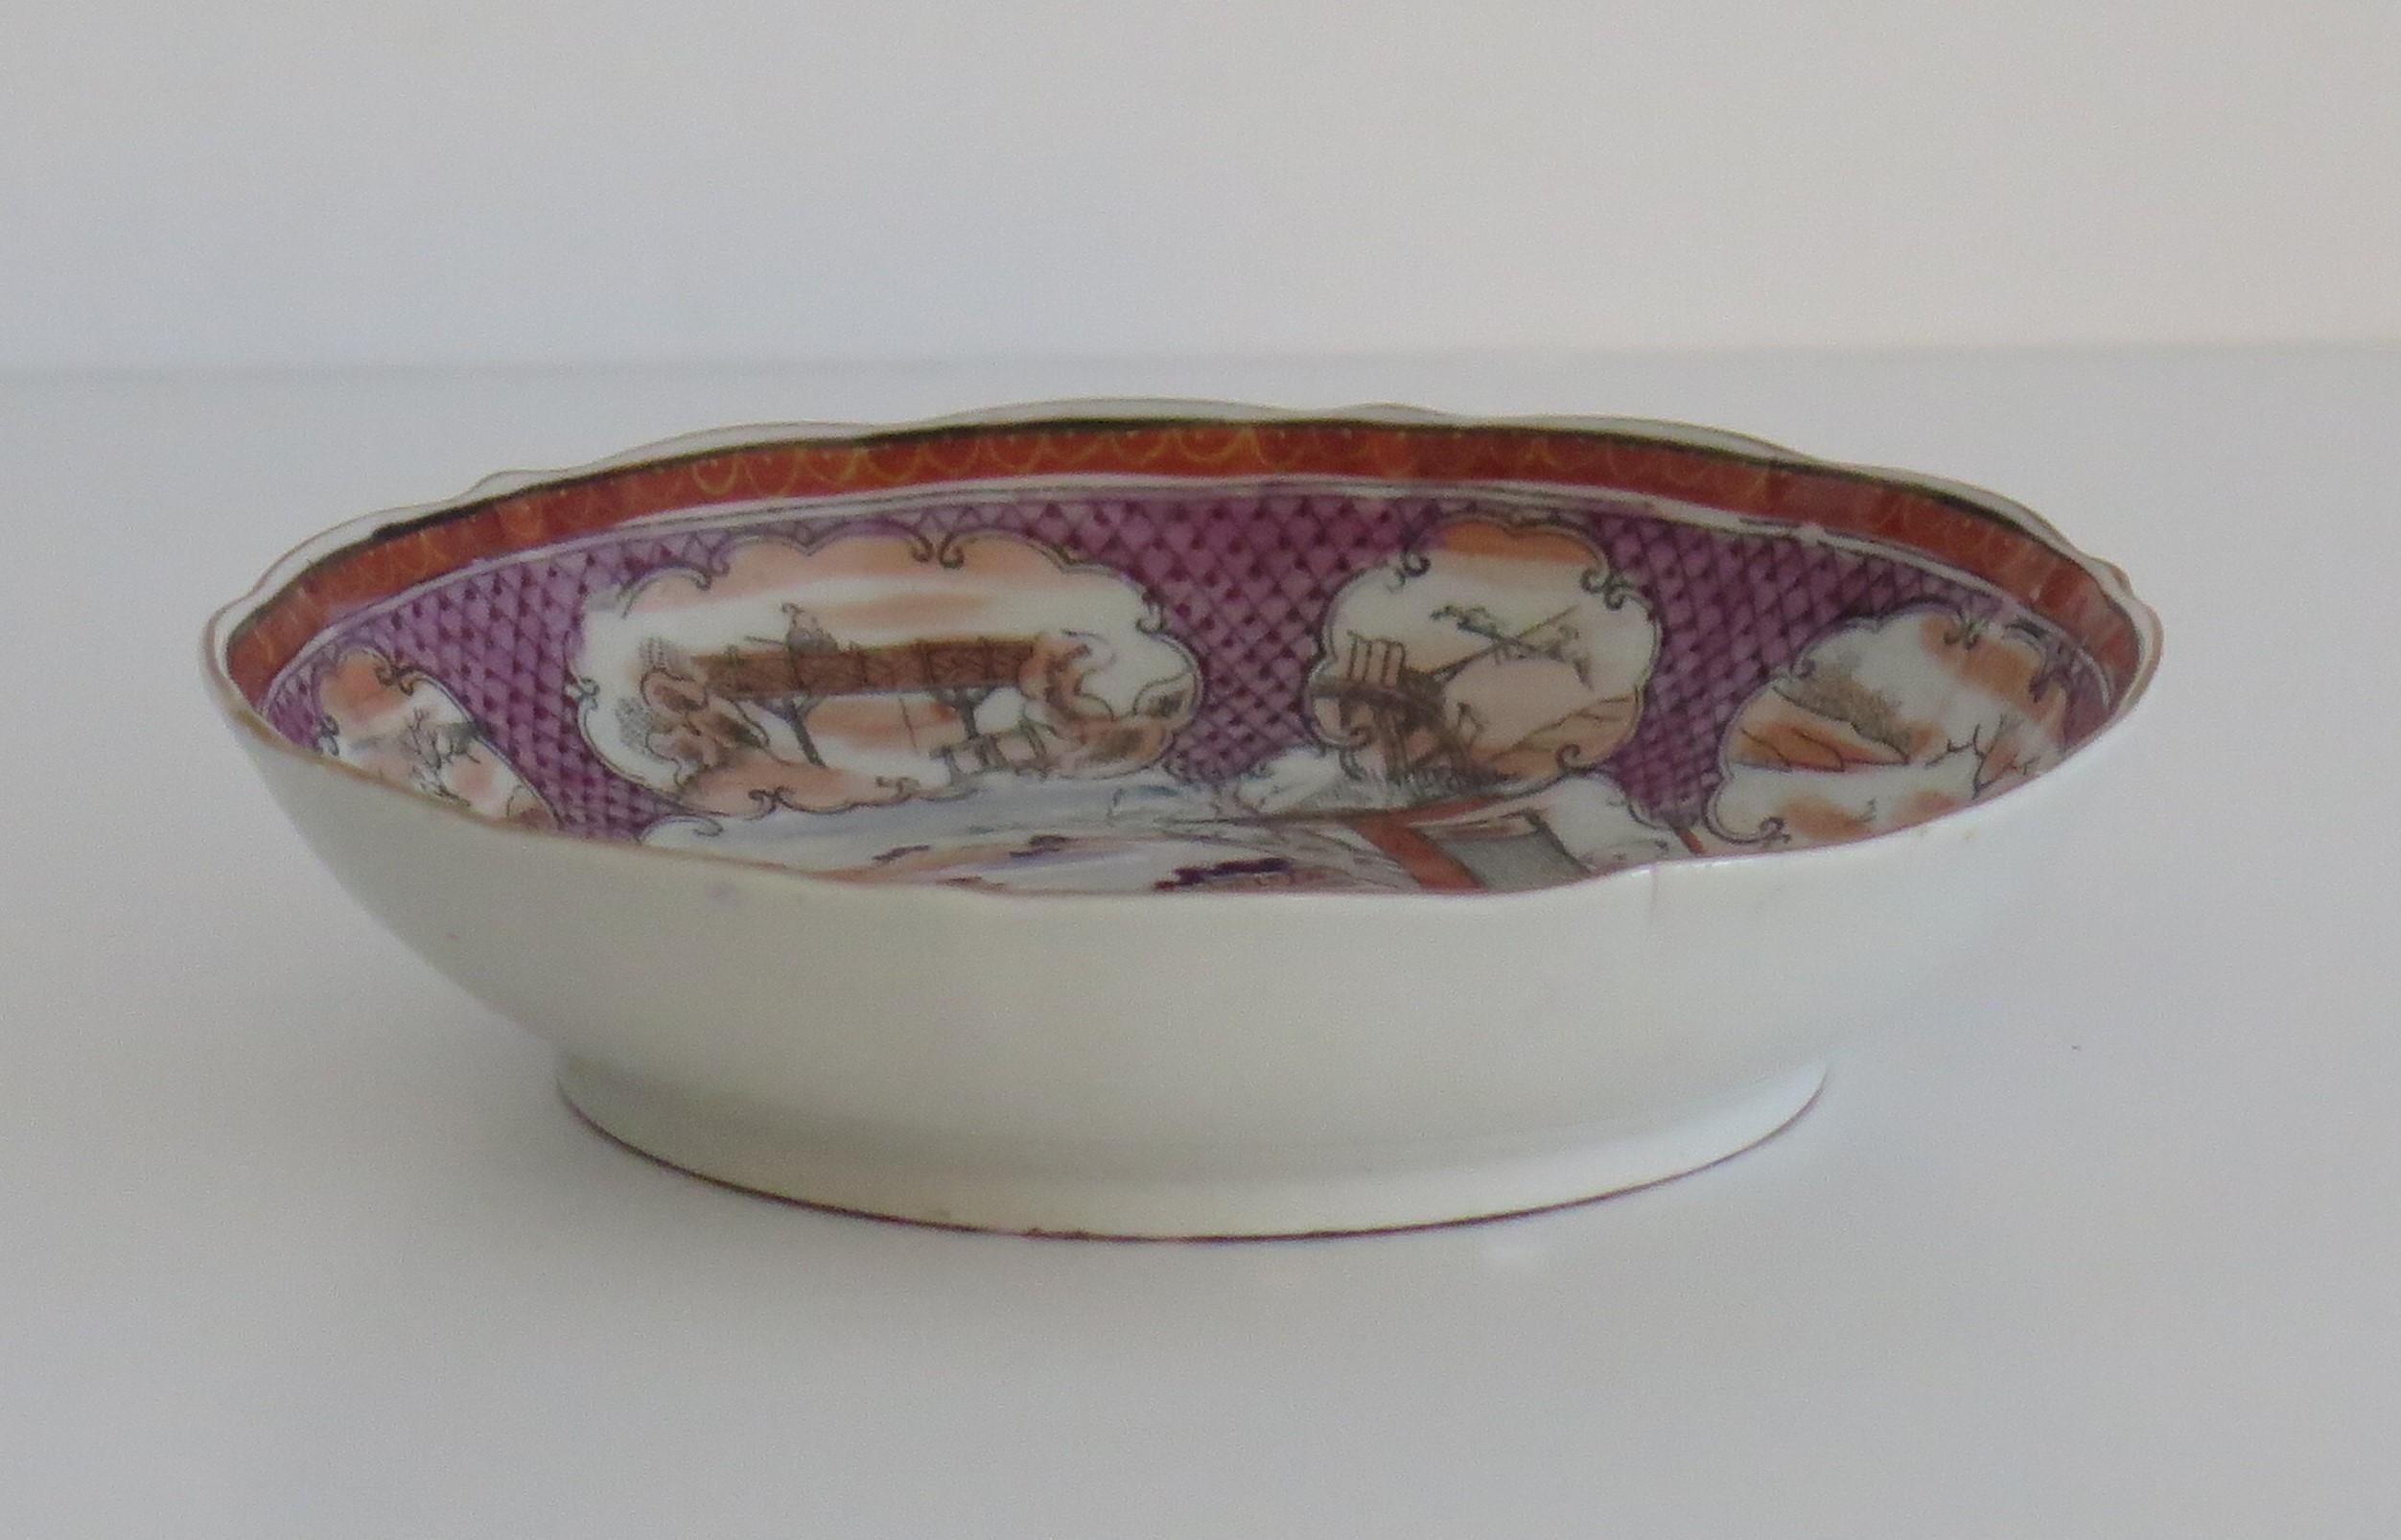 Early Miles Mason Small Dish Porcelain Boy at Door Pattern, circa 1805 For Sale 1